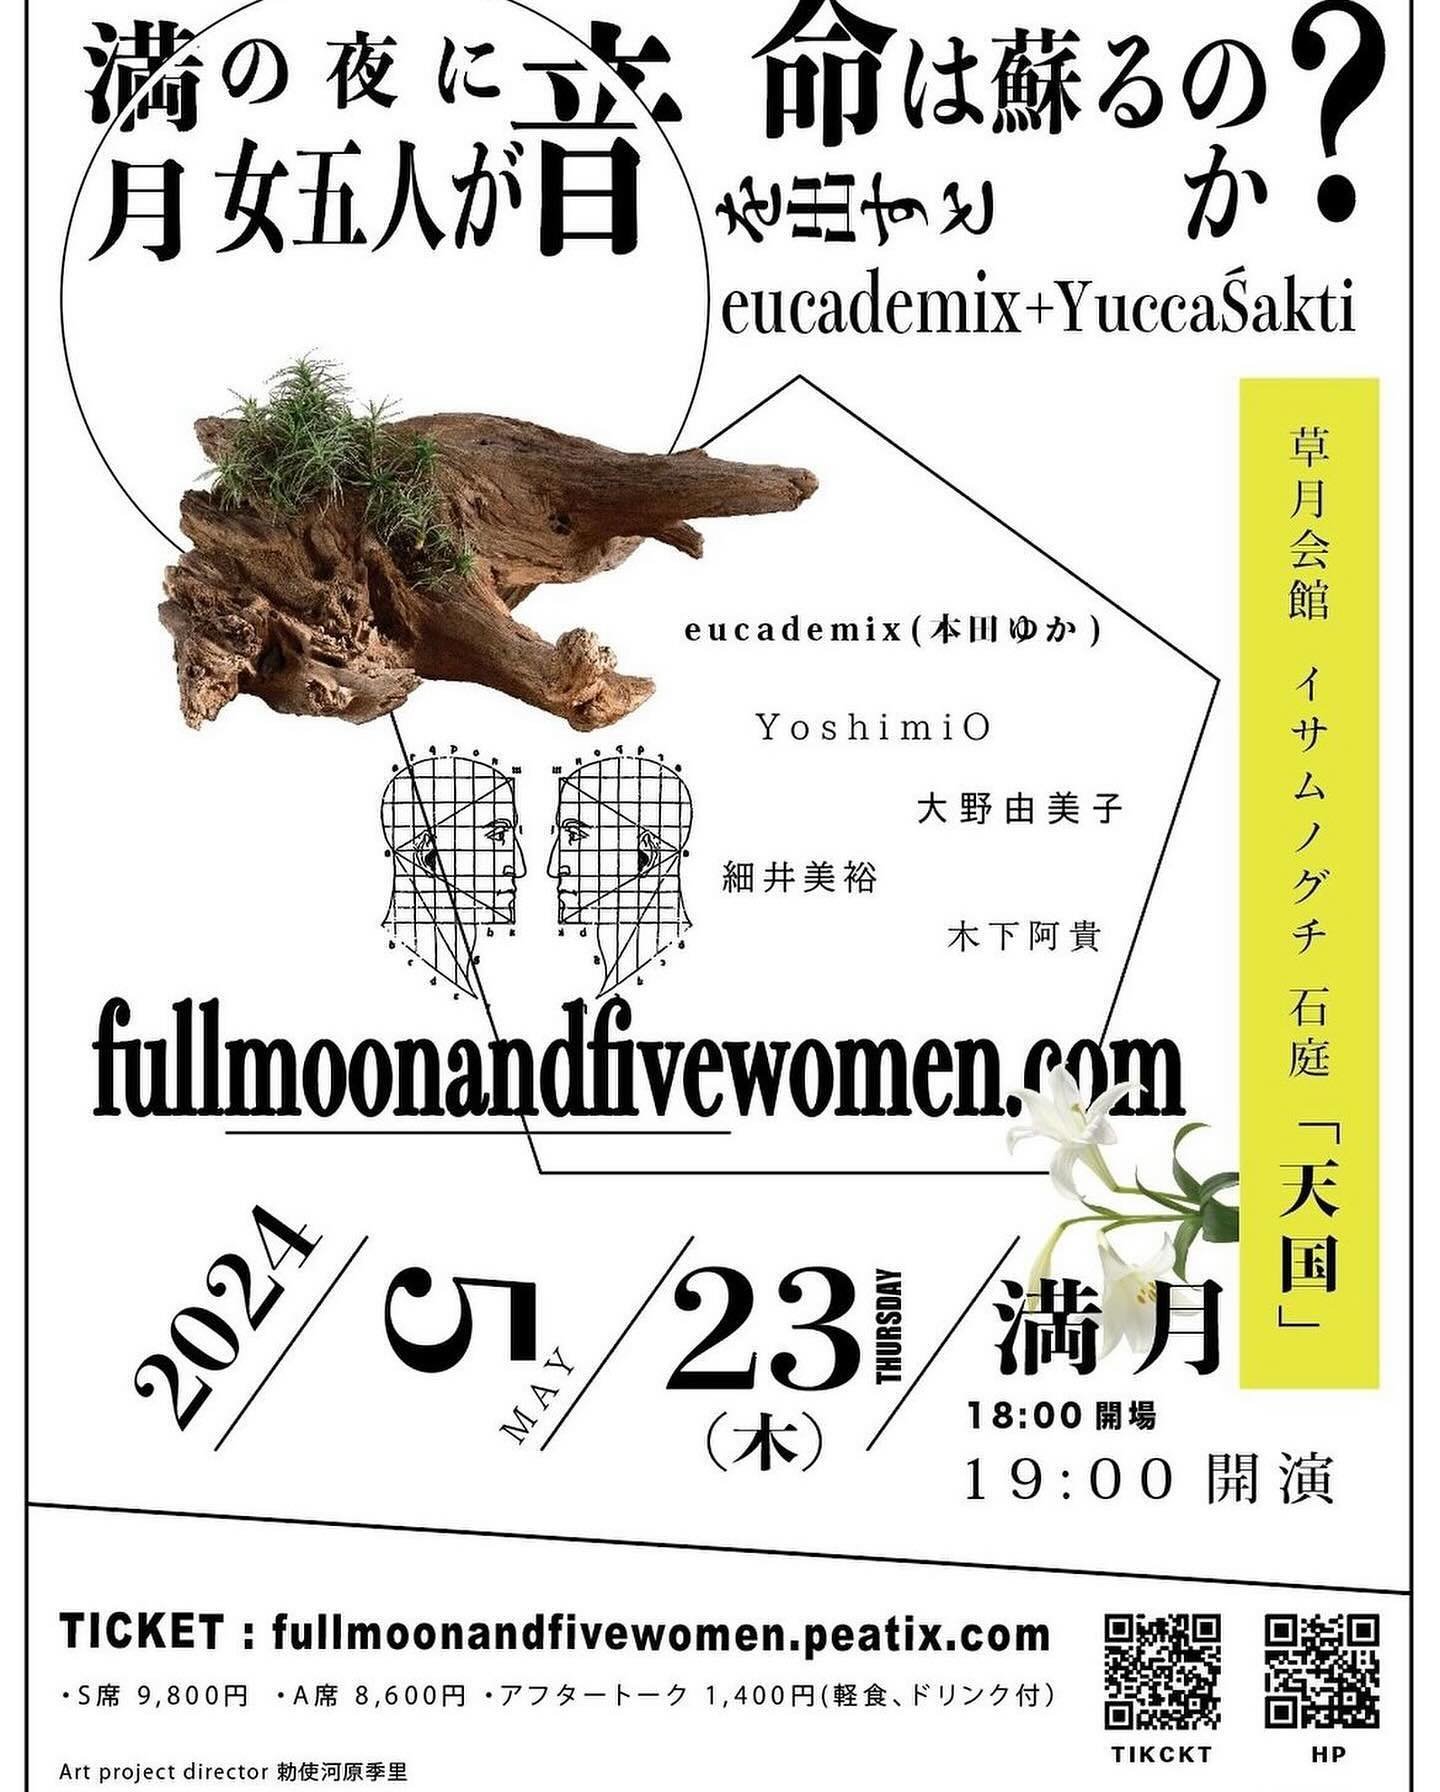 People of Earth (particularly those in Japan/Tokyo...) please take note:

If you are seeking a magical musical and overall sensory experience of depth and originality, look no further than this: Full Moon and Five Women. Five remarkable women in a ve